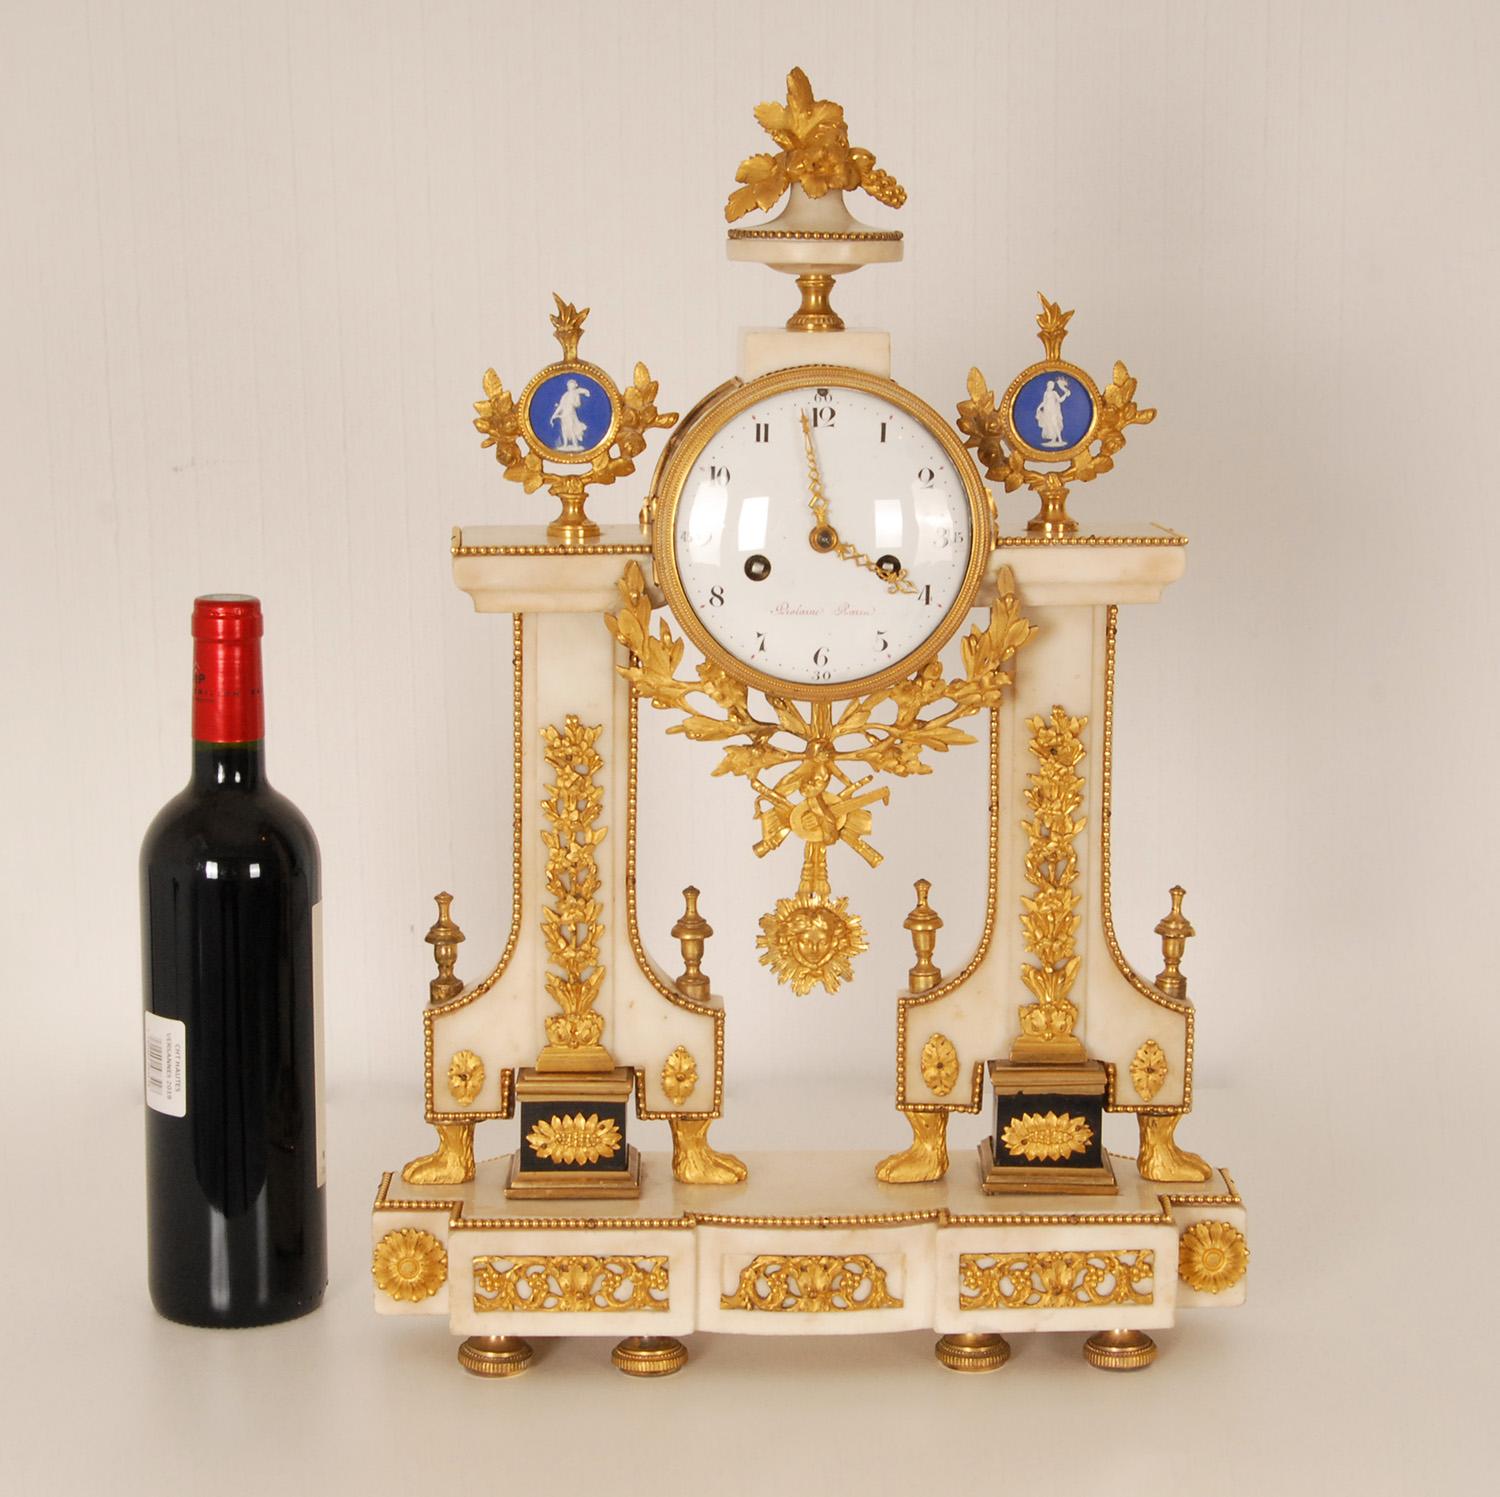 18th century French Louis XVI style and period mantel clock pendulum
Style: Louis XVI, Georgian, Antique, French, Neo classical
Material white marble, Mercury gold gilded bronze, Ceramic Wedgwood, glass
Origin: France, Paris, 18th century Date of